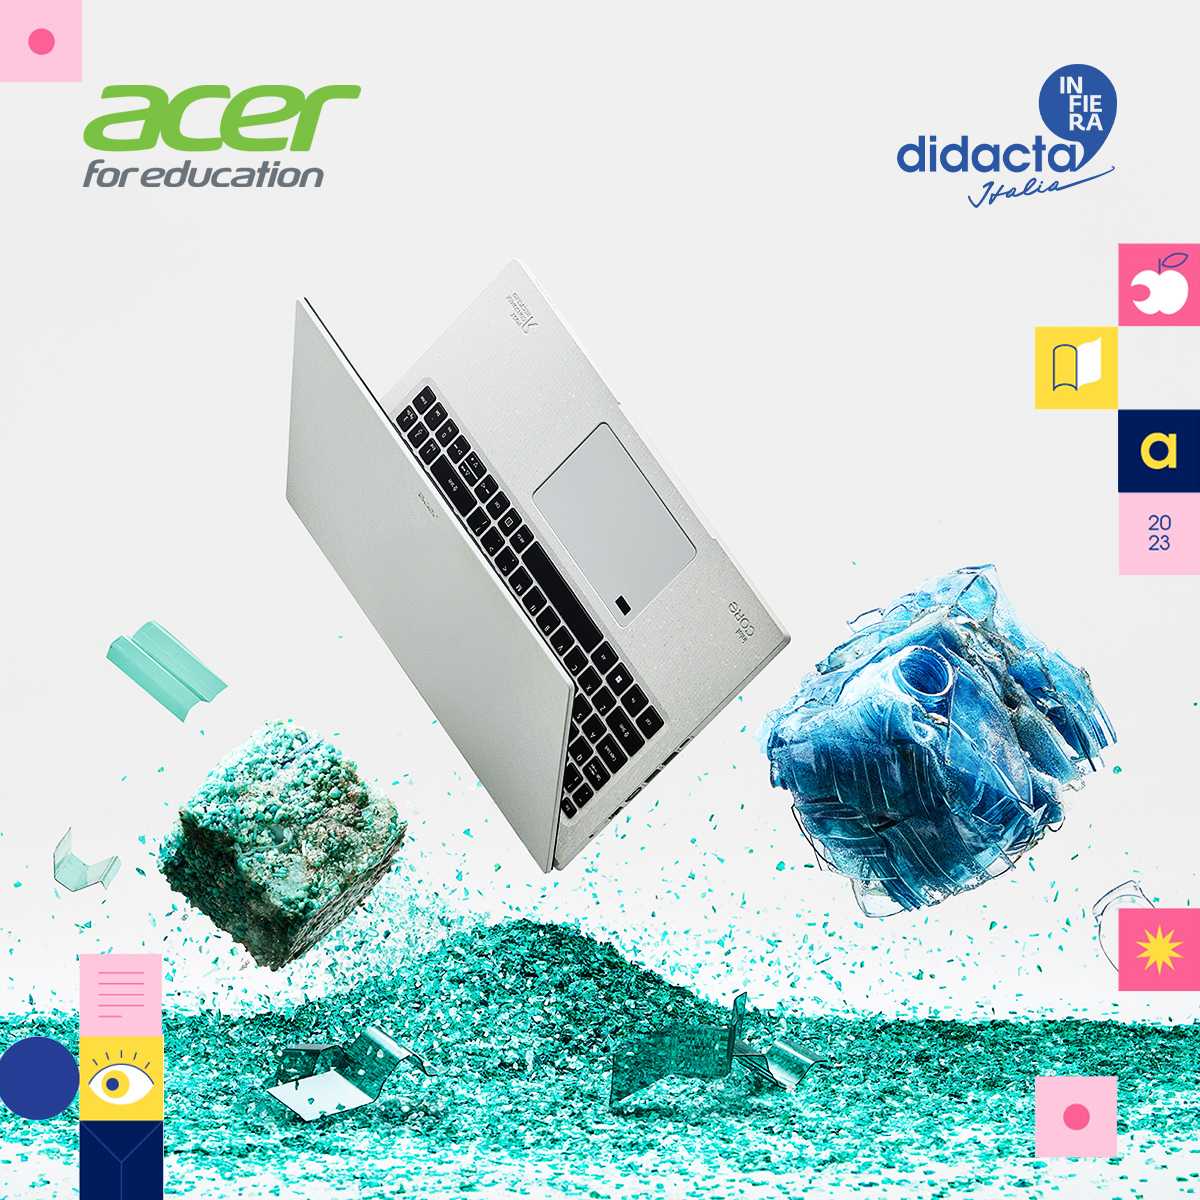 Acer 2023: for Education will participate in the Didacta Italia 2023 Fair